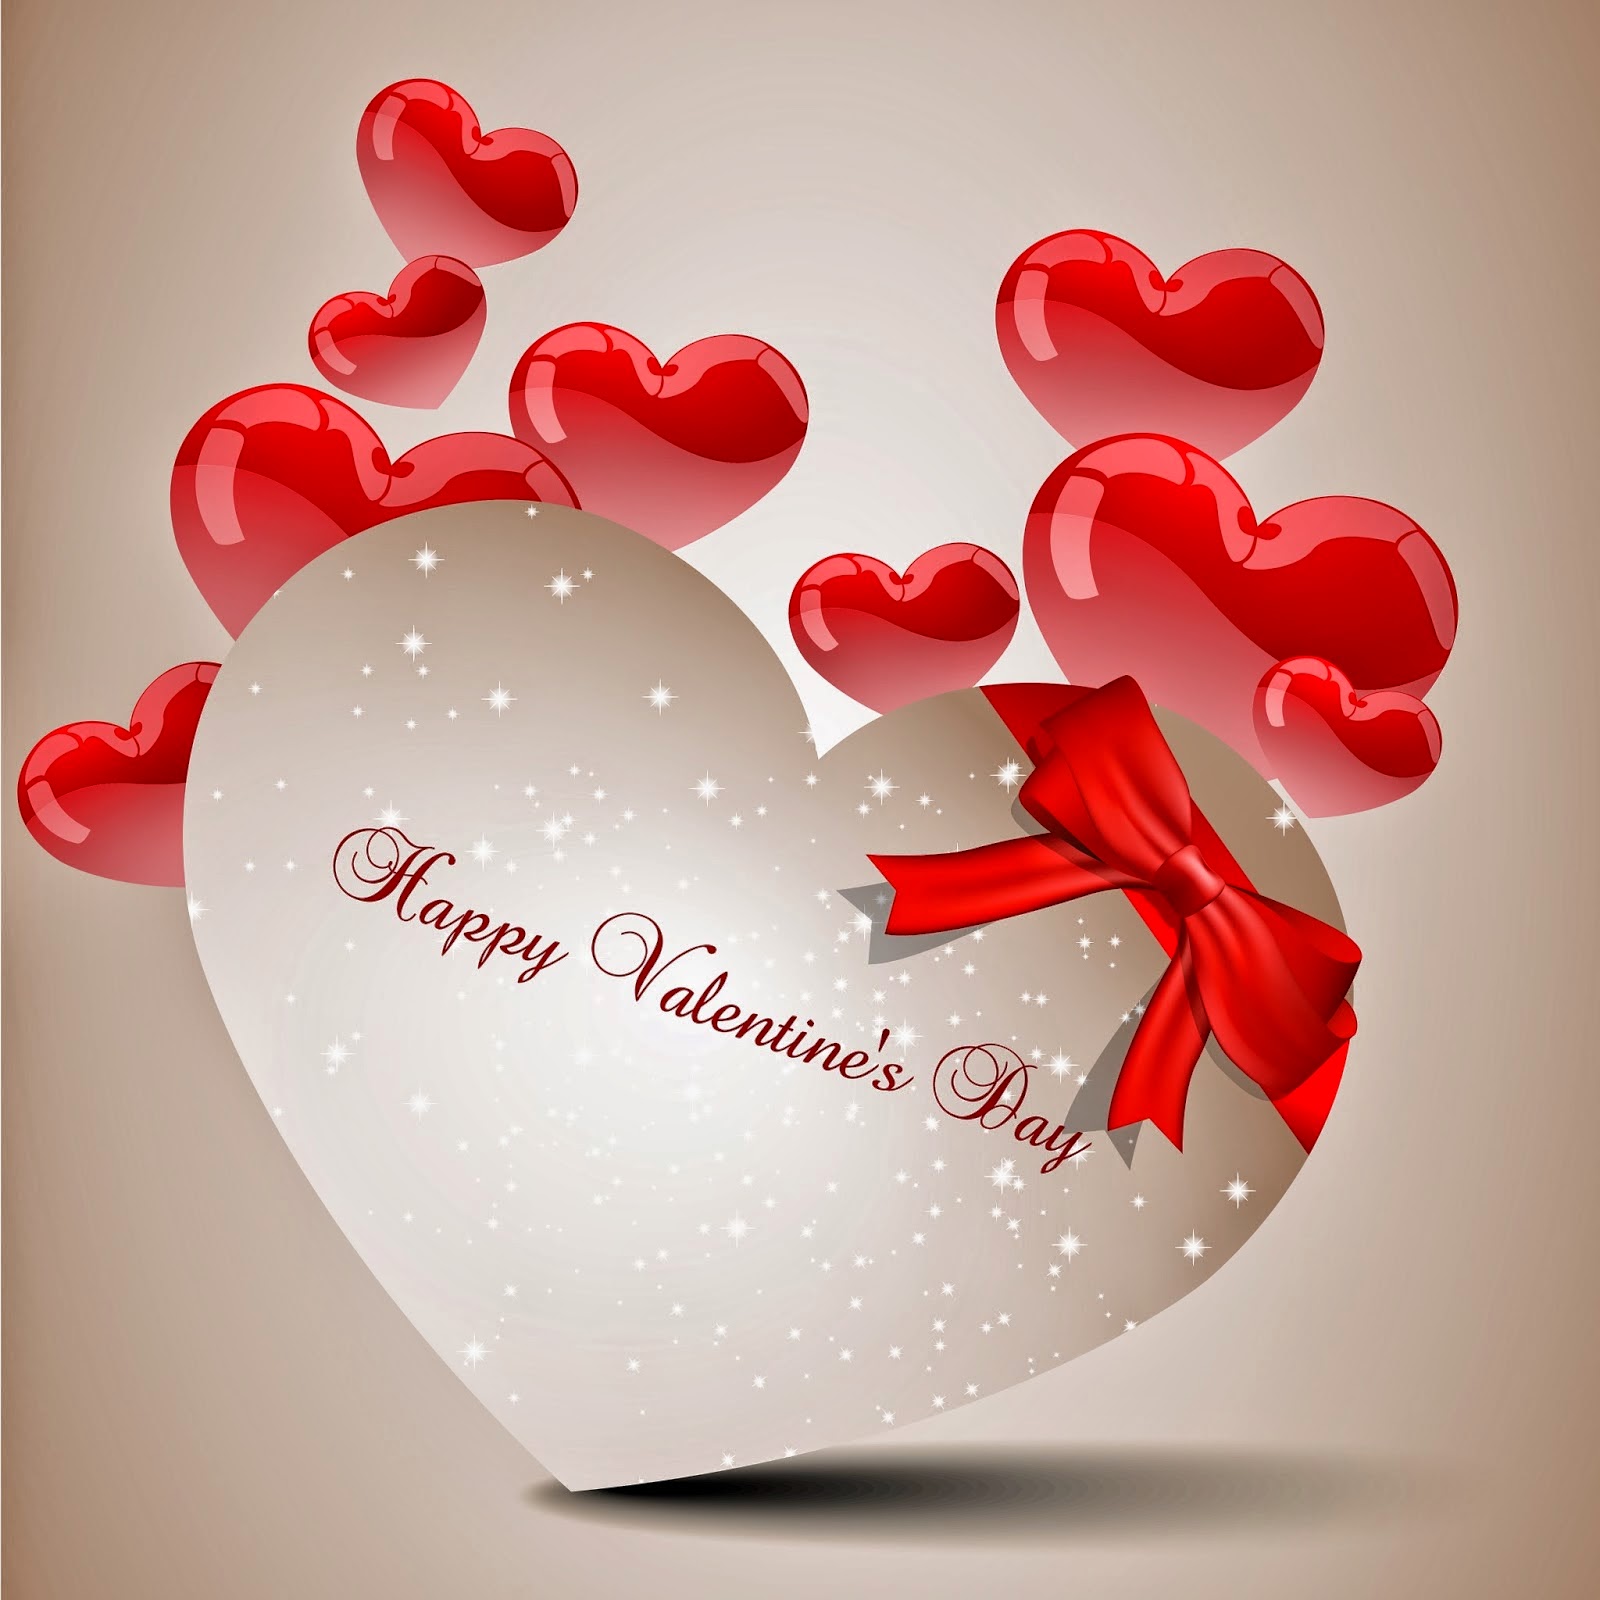 Download Valentines Day Images For Whatsapp Dp Profile - Happy Valentines Day 2019 , HD Wallpaper & Backgrounds